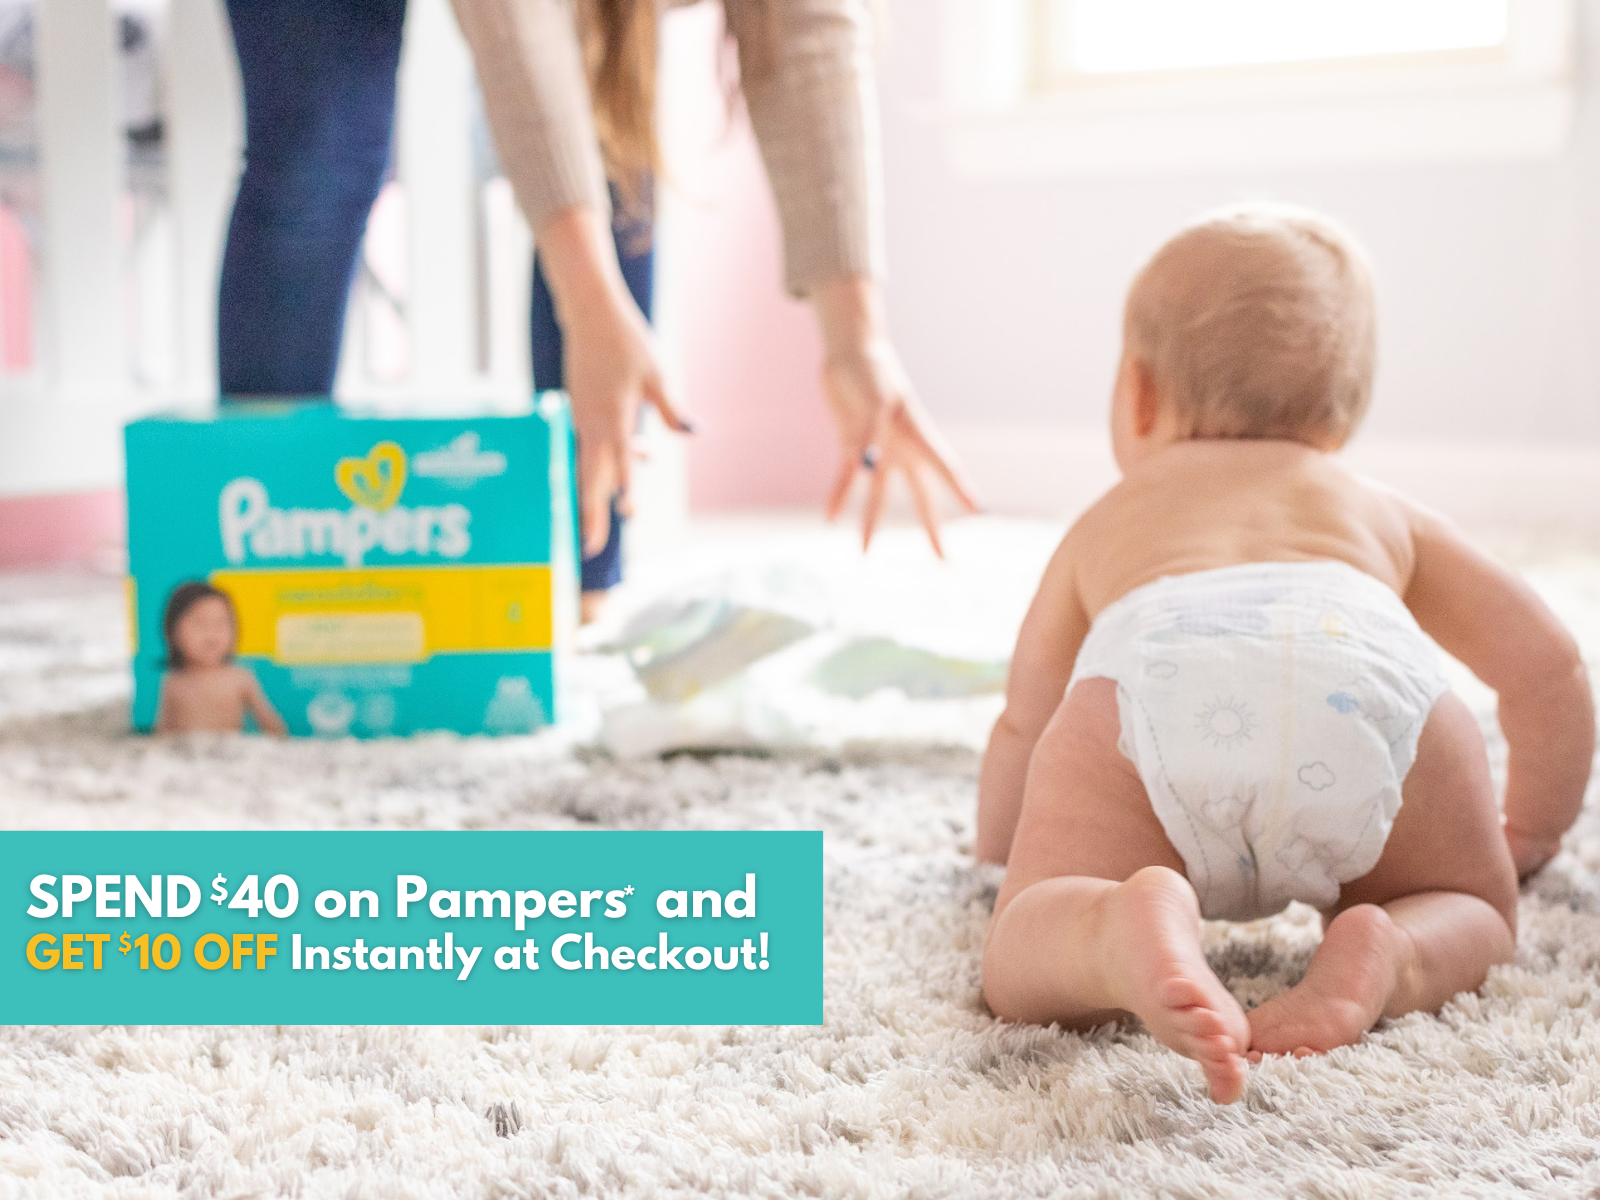 Stock Your Cart – Spend $40 On Pampers* And Get $10 Off Instantly At Checkout At Publix